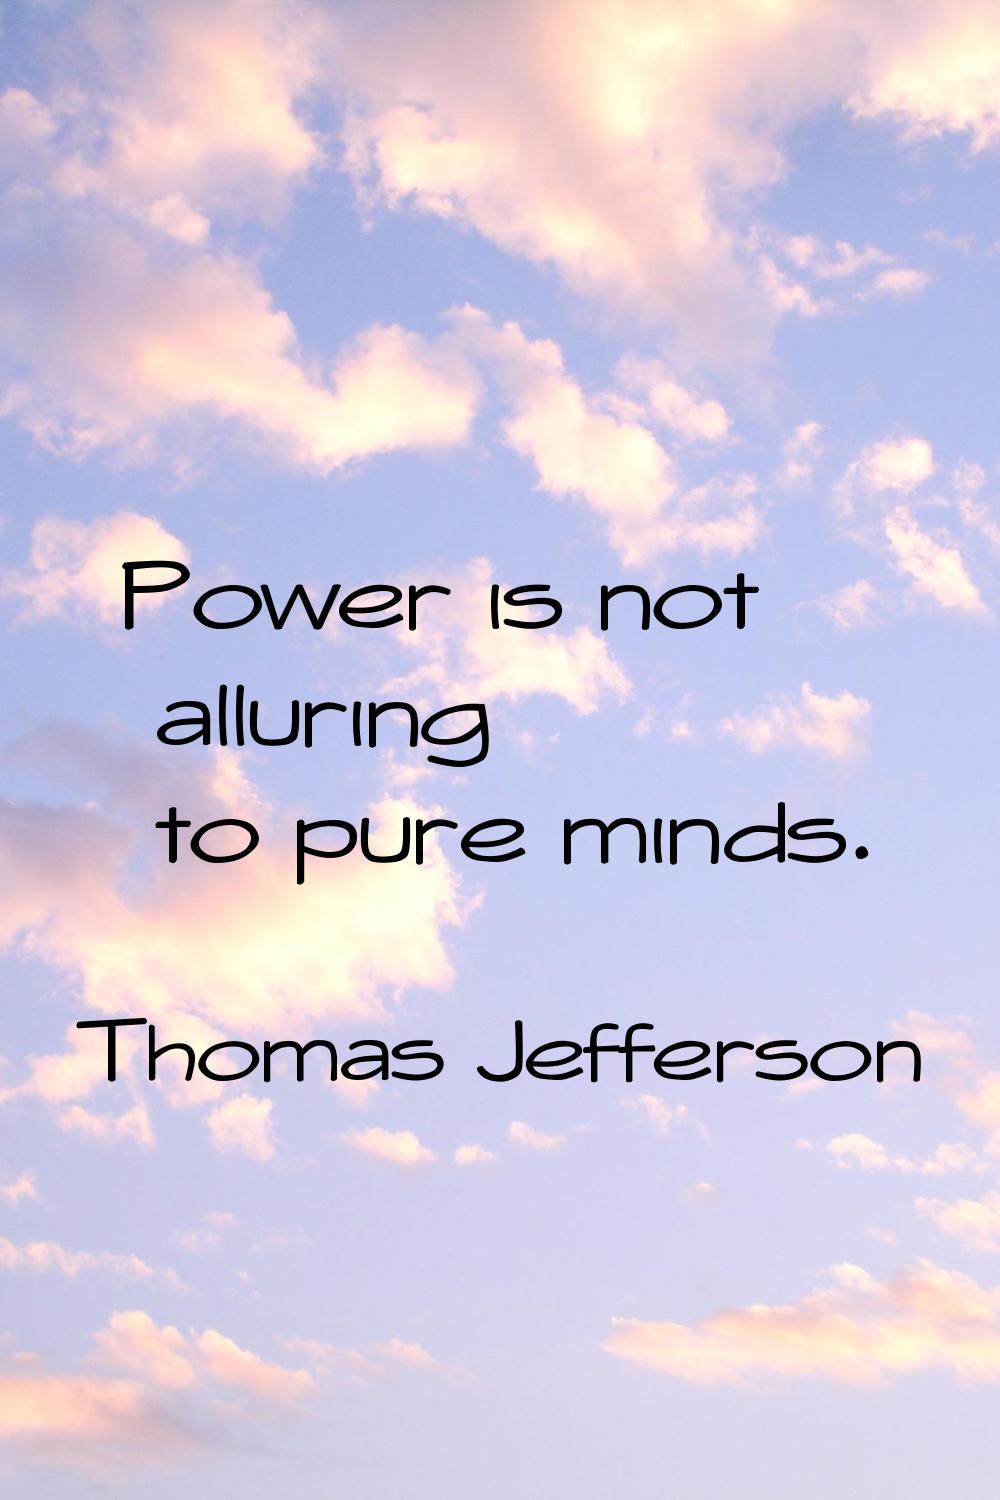 Power is not alluring to pure minds.